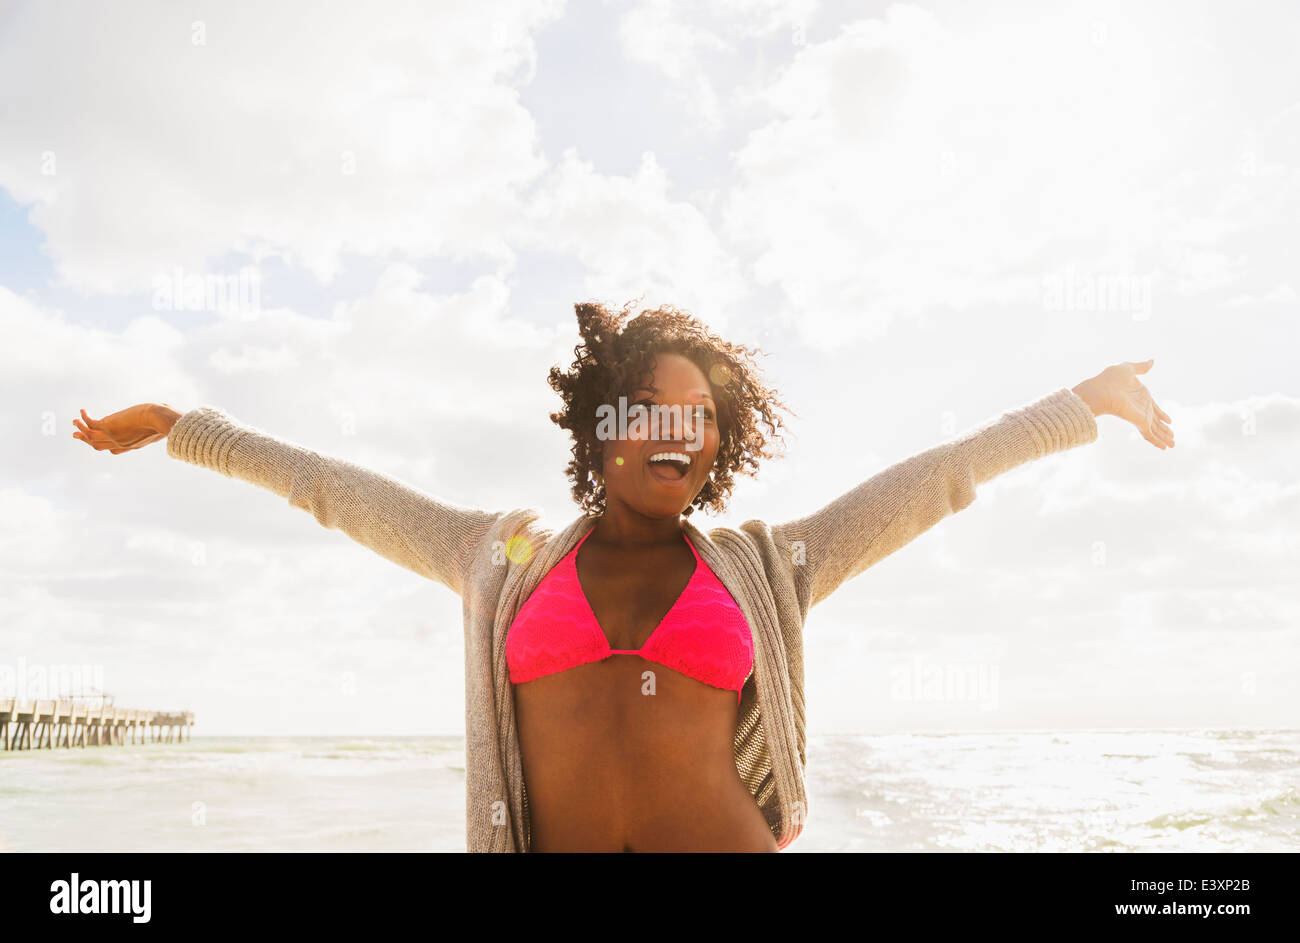 African American Woman cheering on beach Banque D'Images